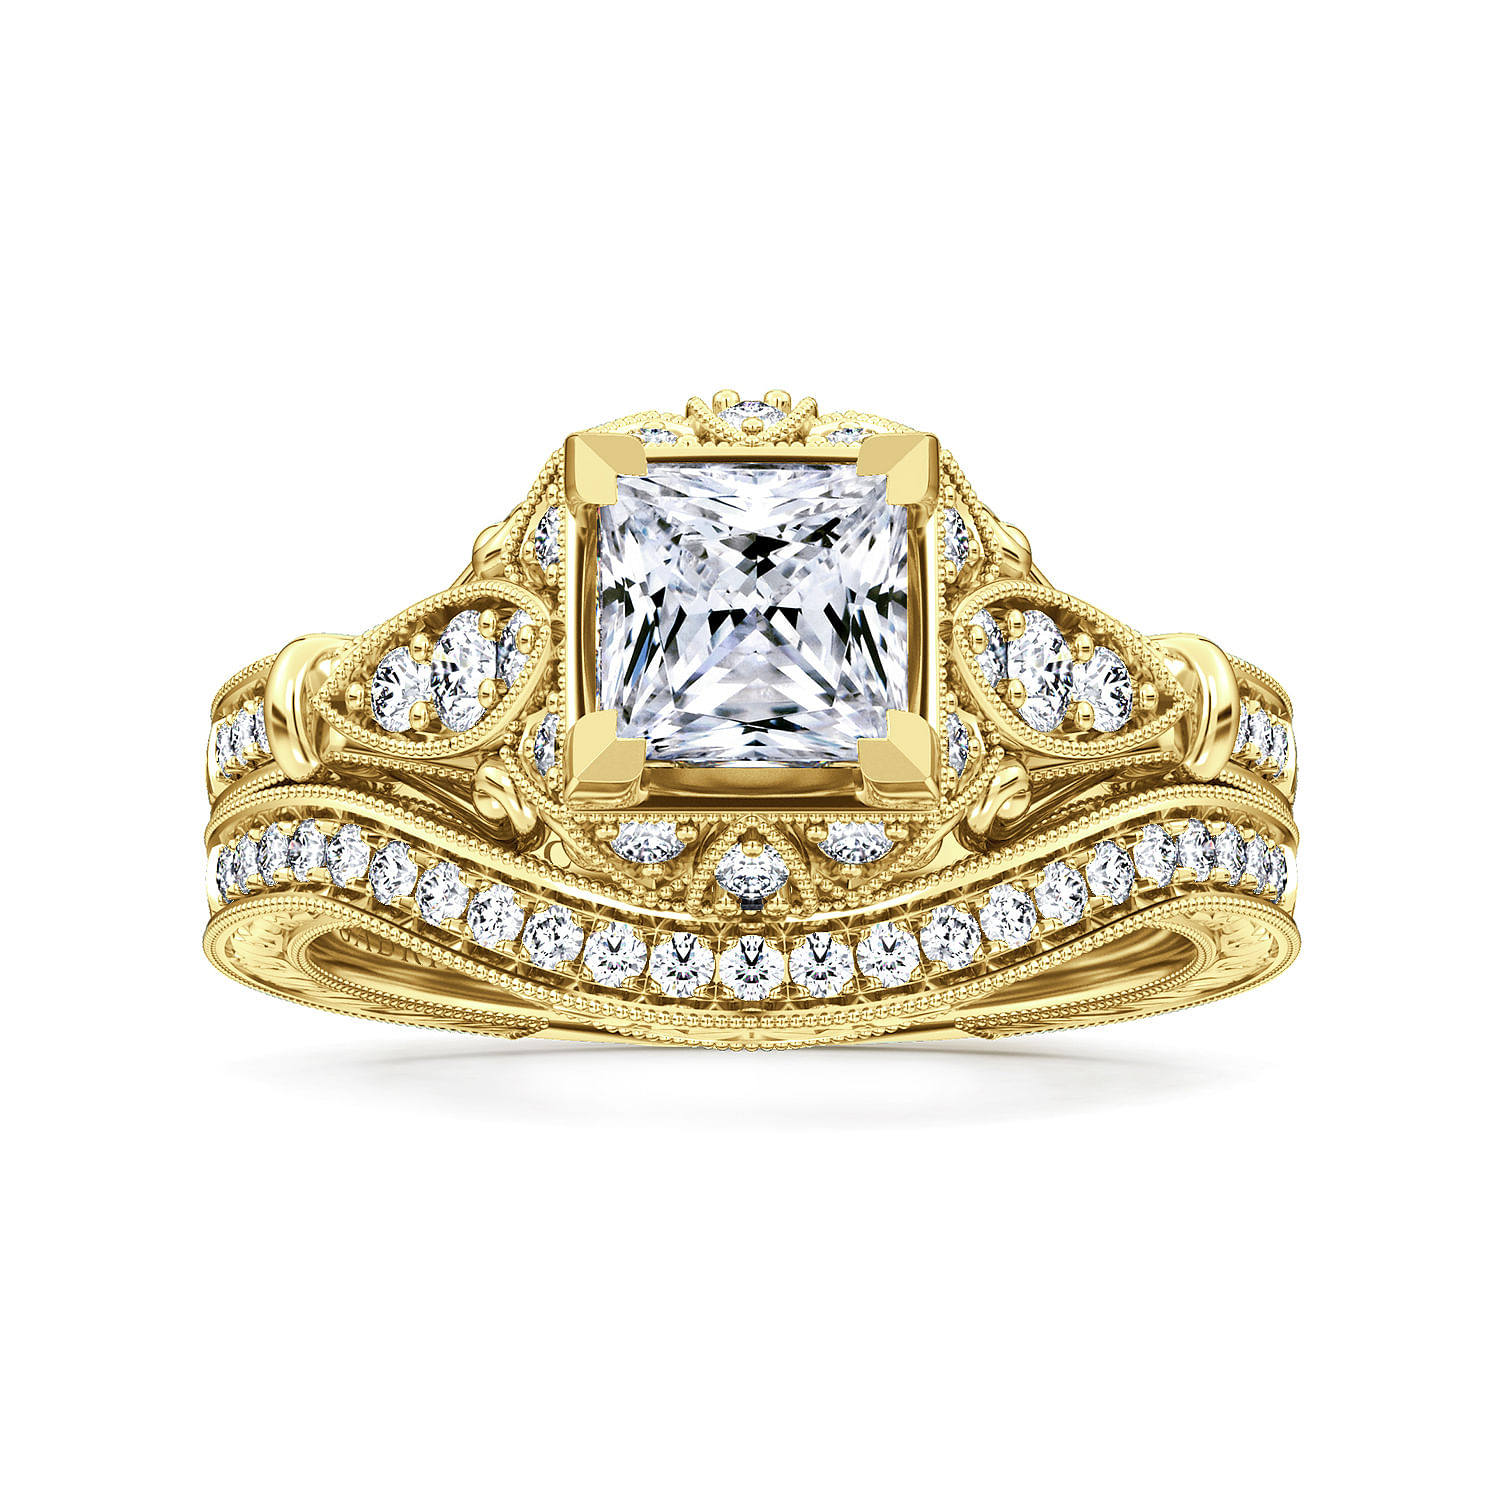 Unique 14K Yellow Gold Vintage Inspired Princess Cut Halo Diamond Engagement Ring